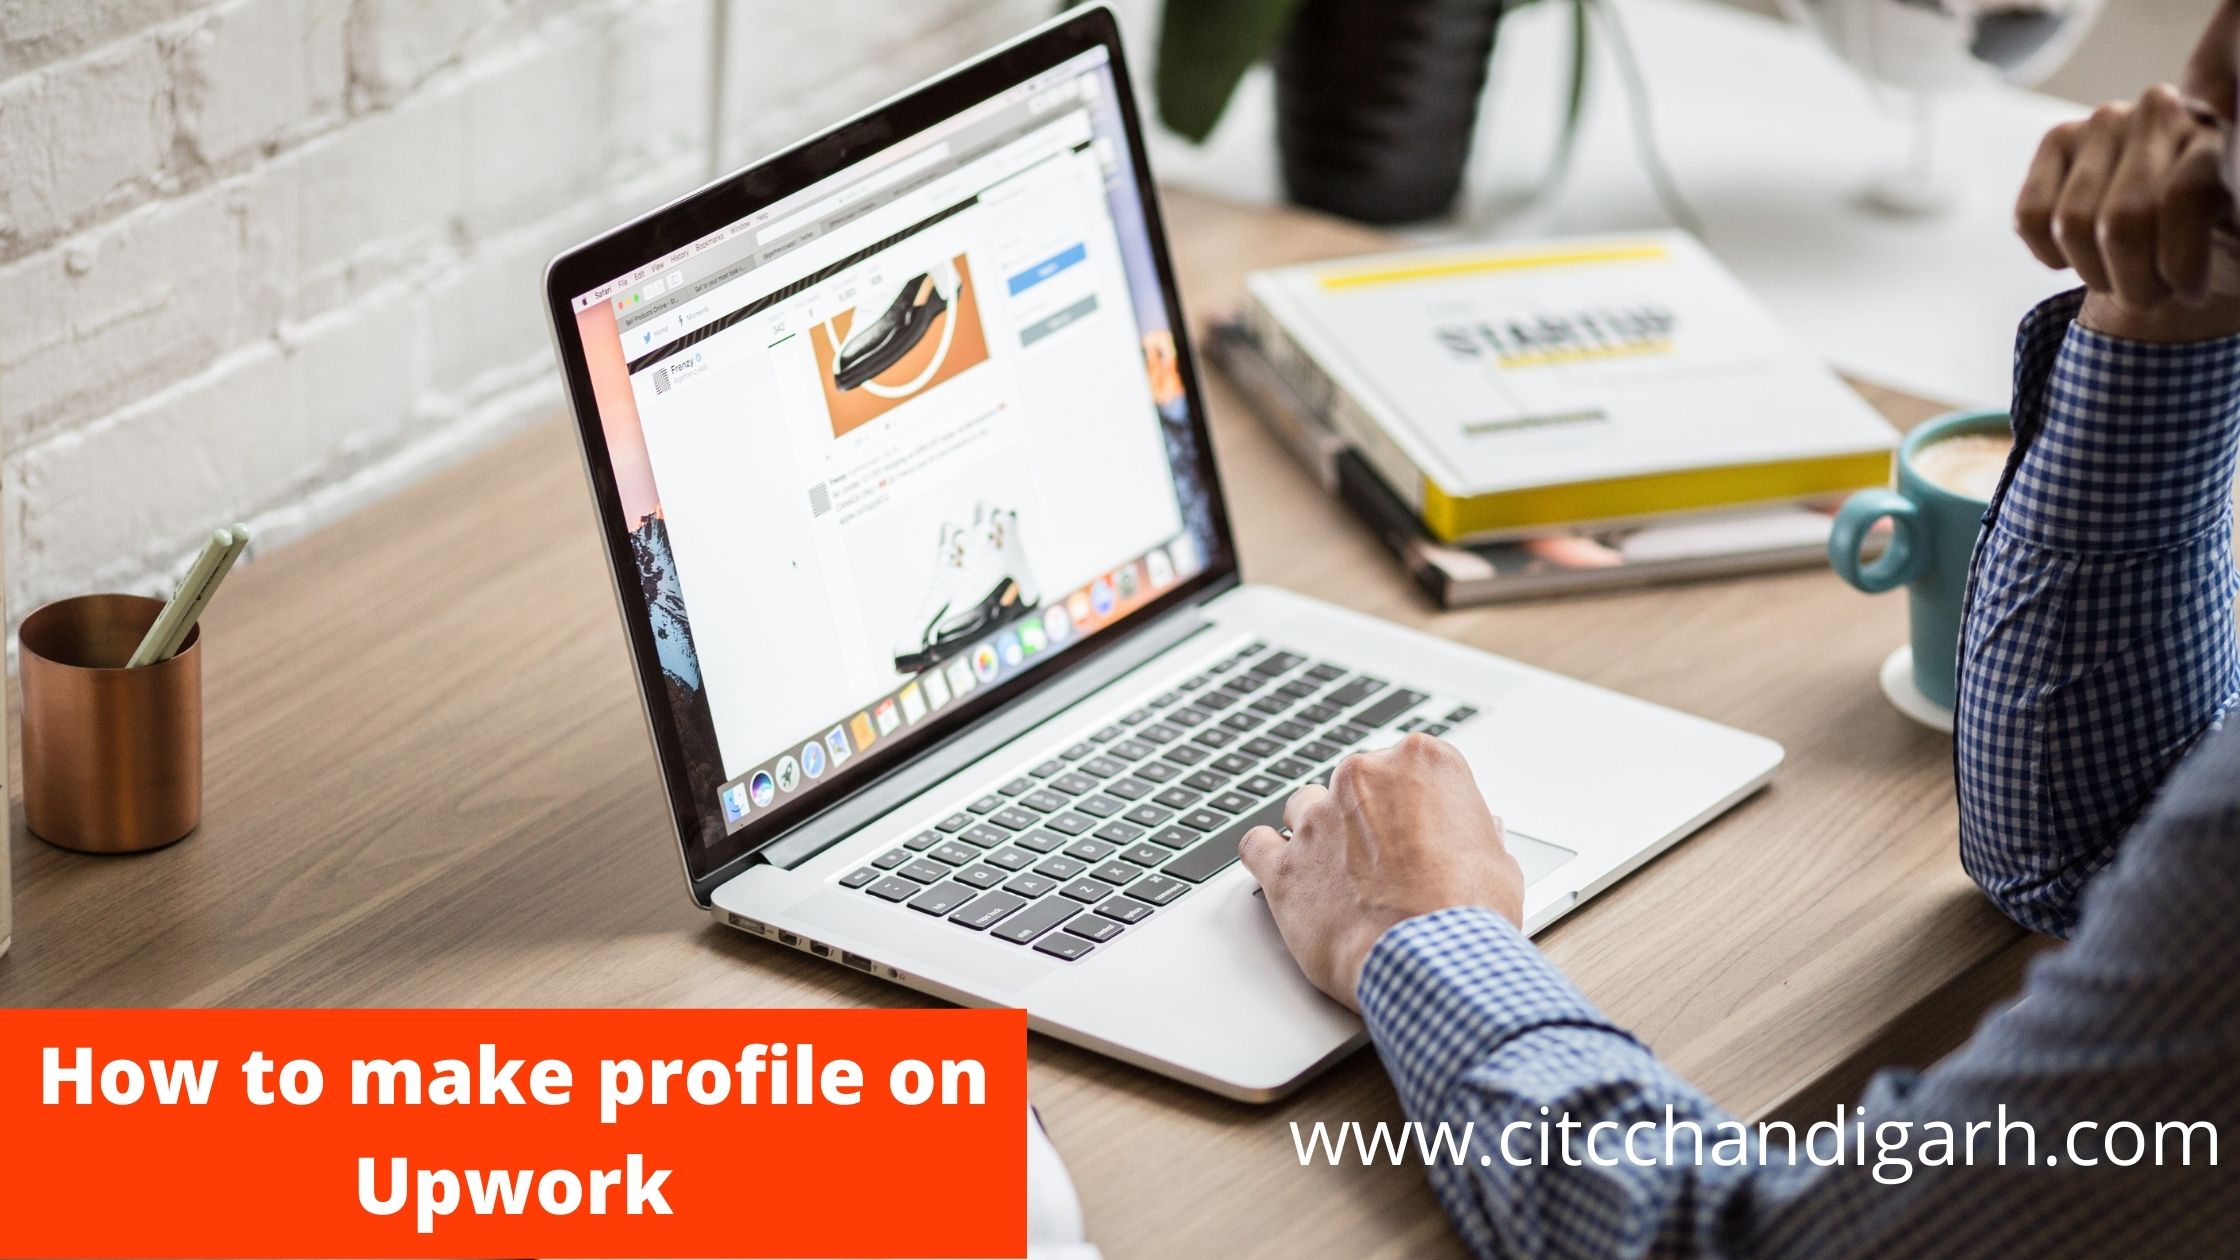 How to make a good profile on Upwork 2021 | CITC